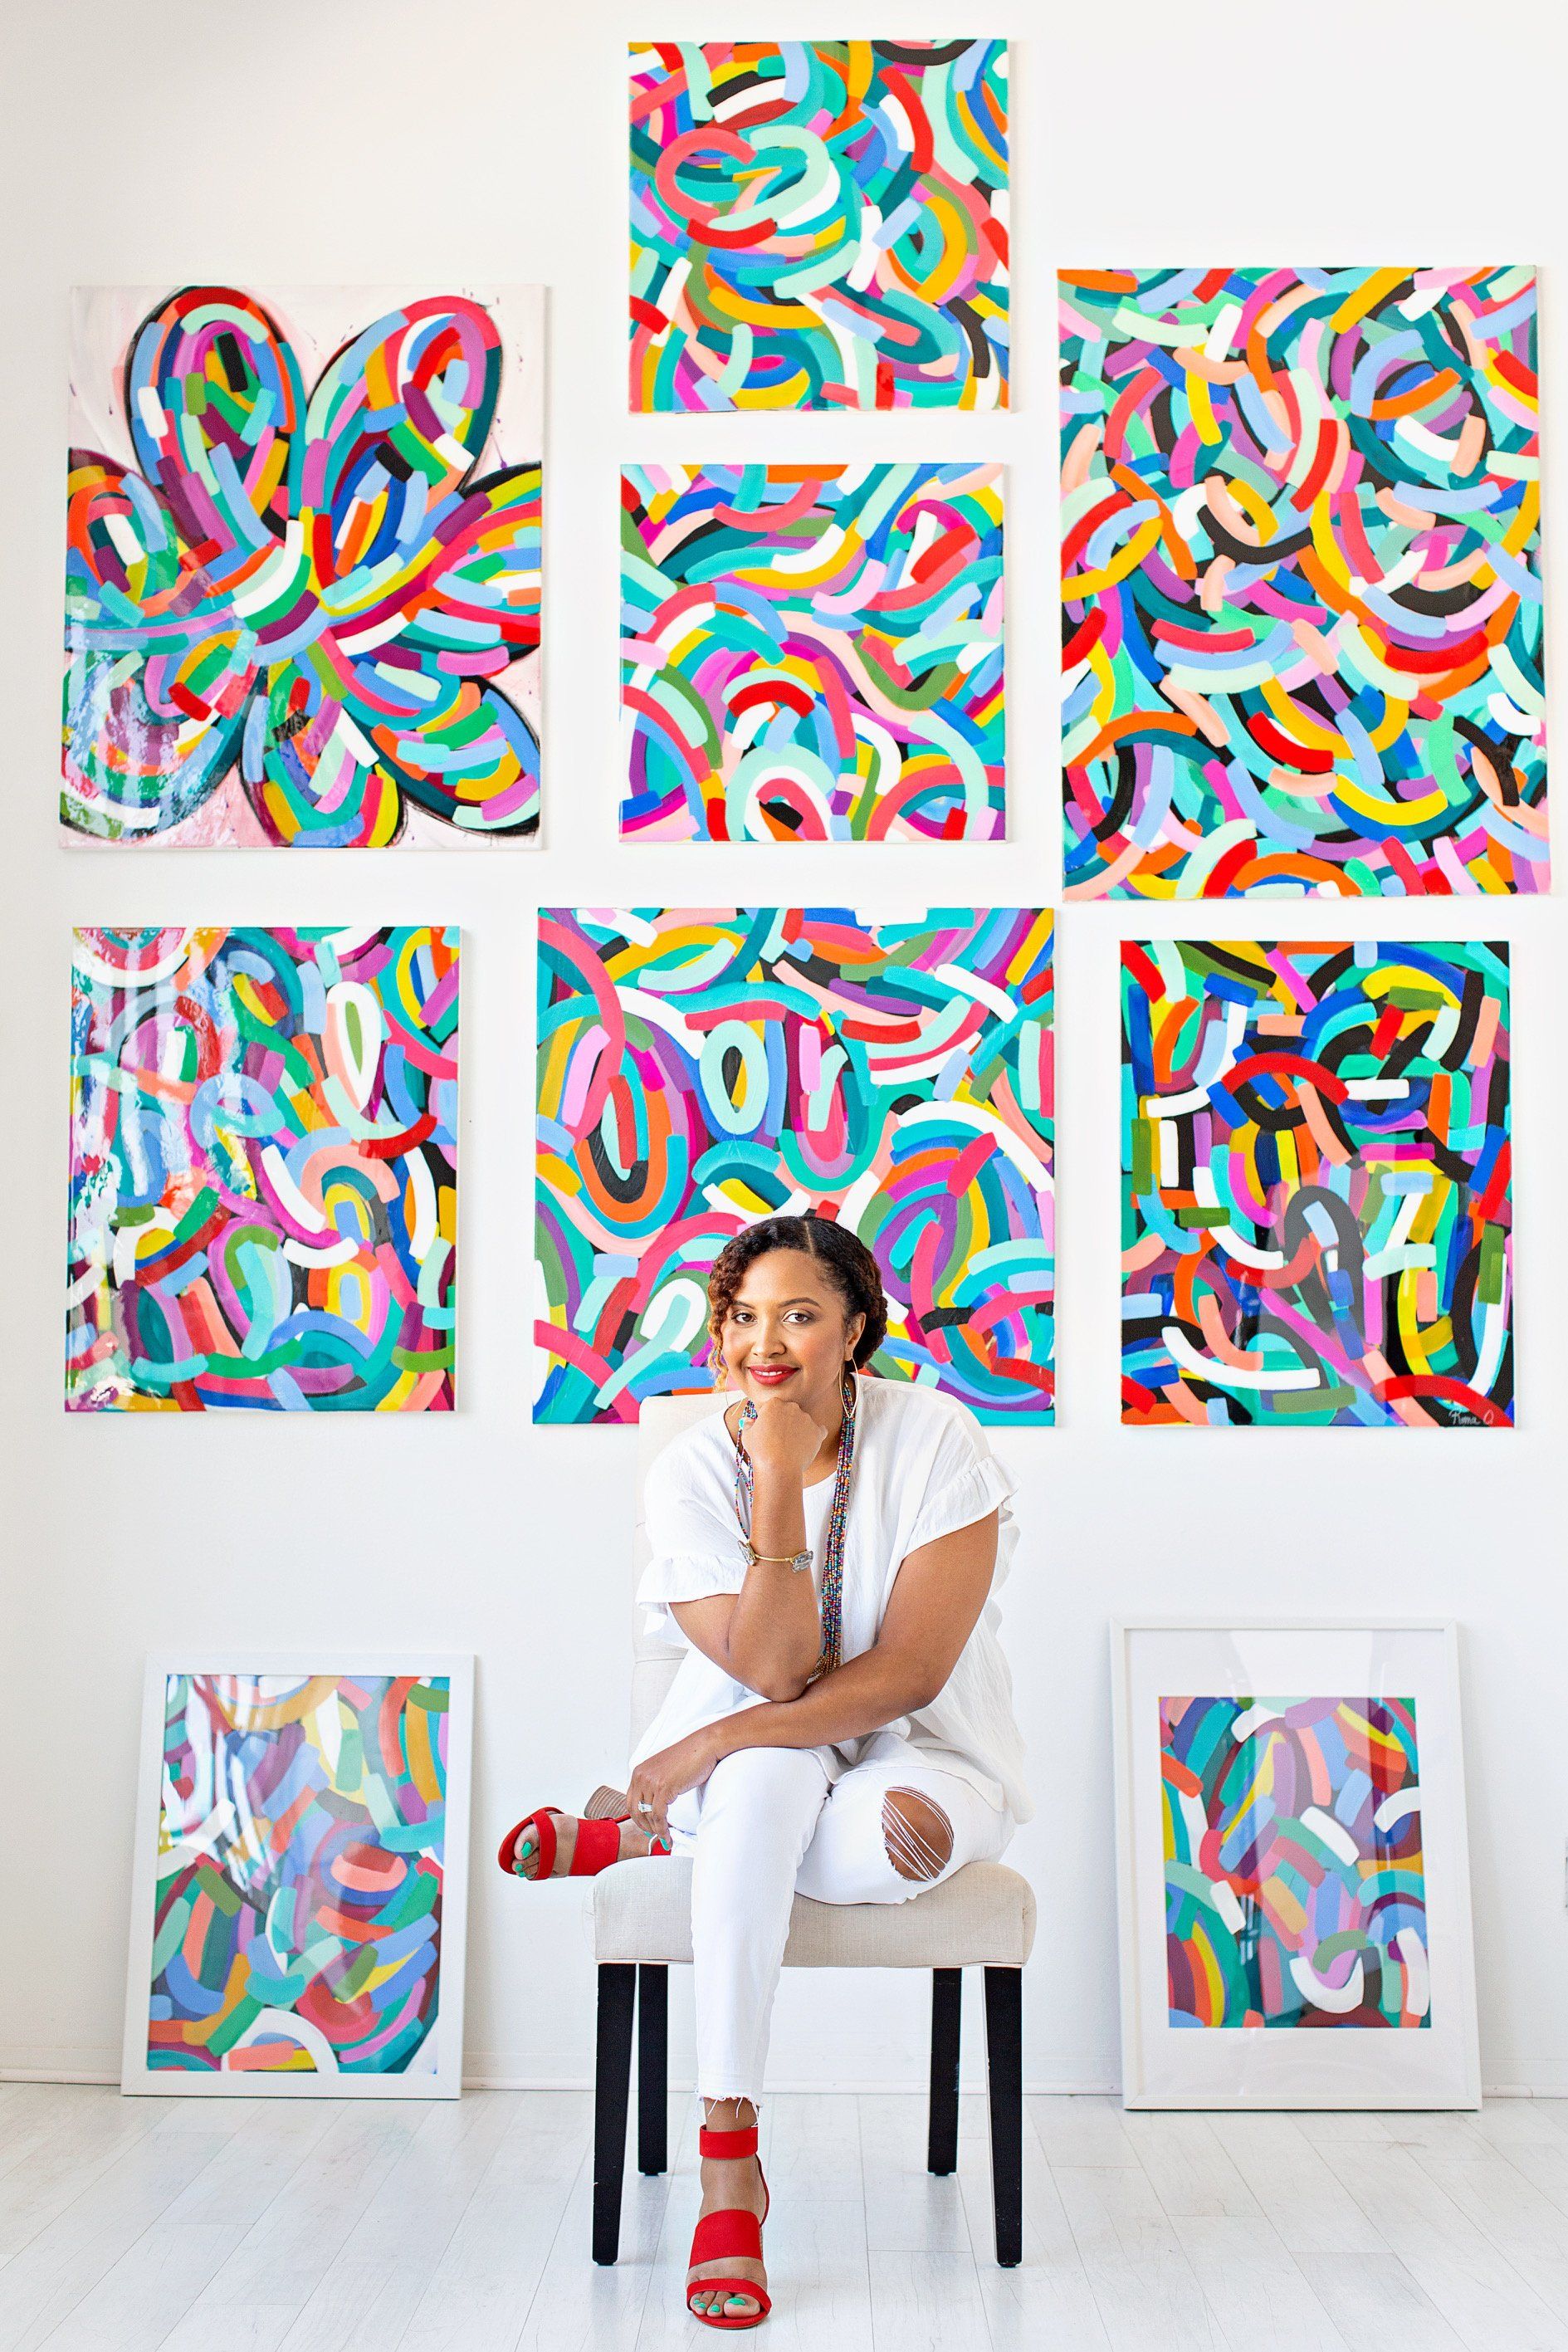 Roma Osowo poses with her artwork on the wall behind her as she rests her elbow on her knee and her chin on her elbow. 